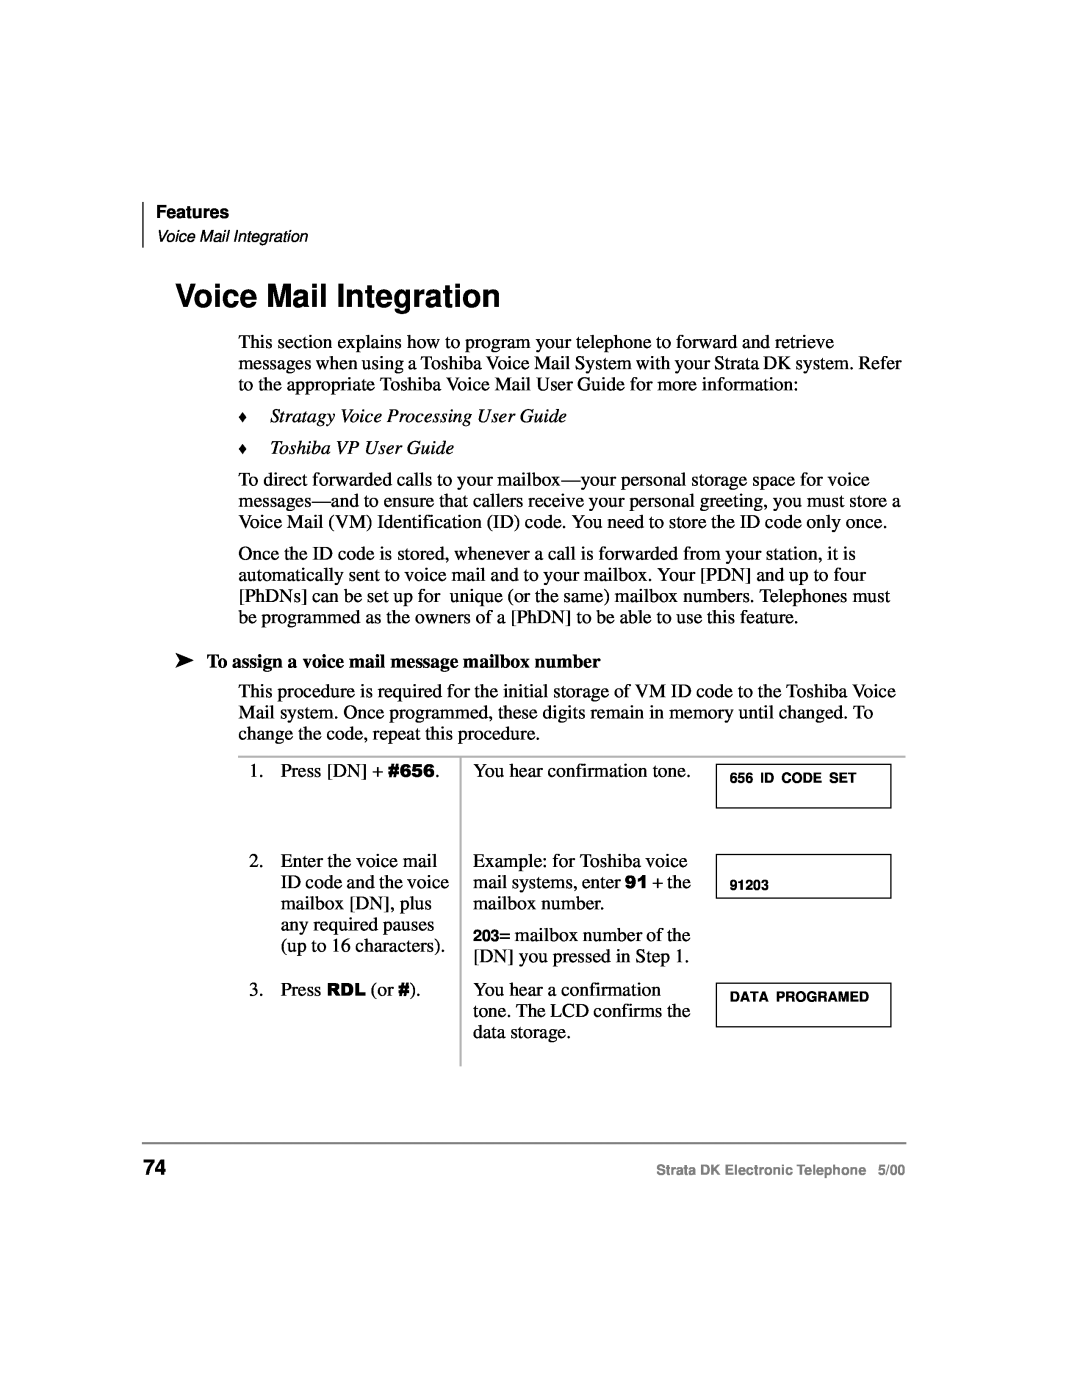 Toshiba Strata DK manual Voice Mail Integration, Stratagy Voice Processing User Guide Toshiba VP User Guide 